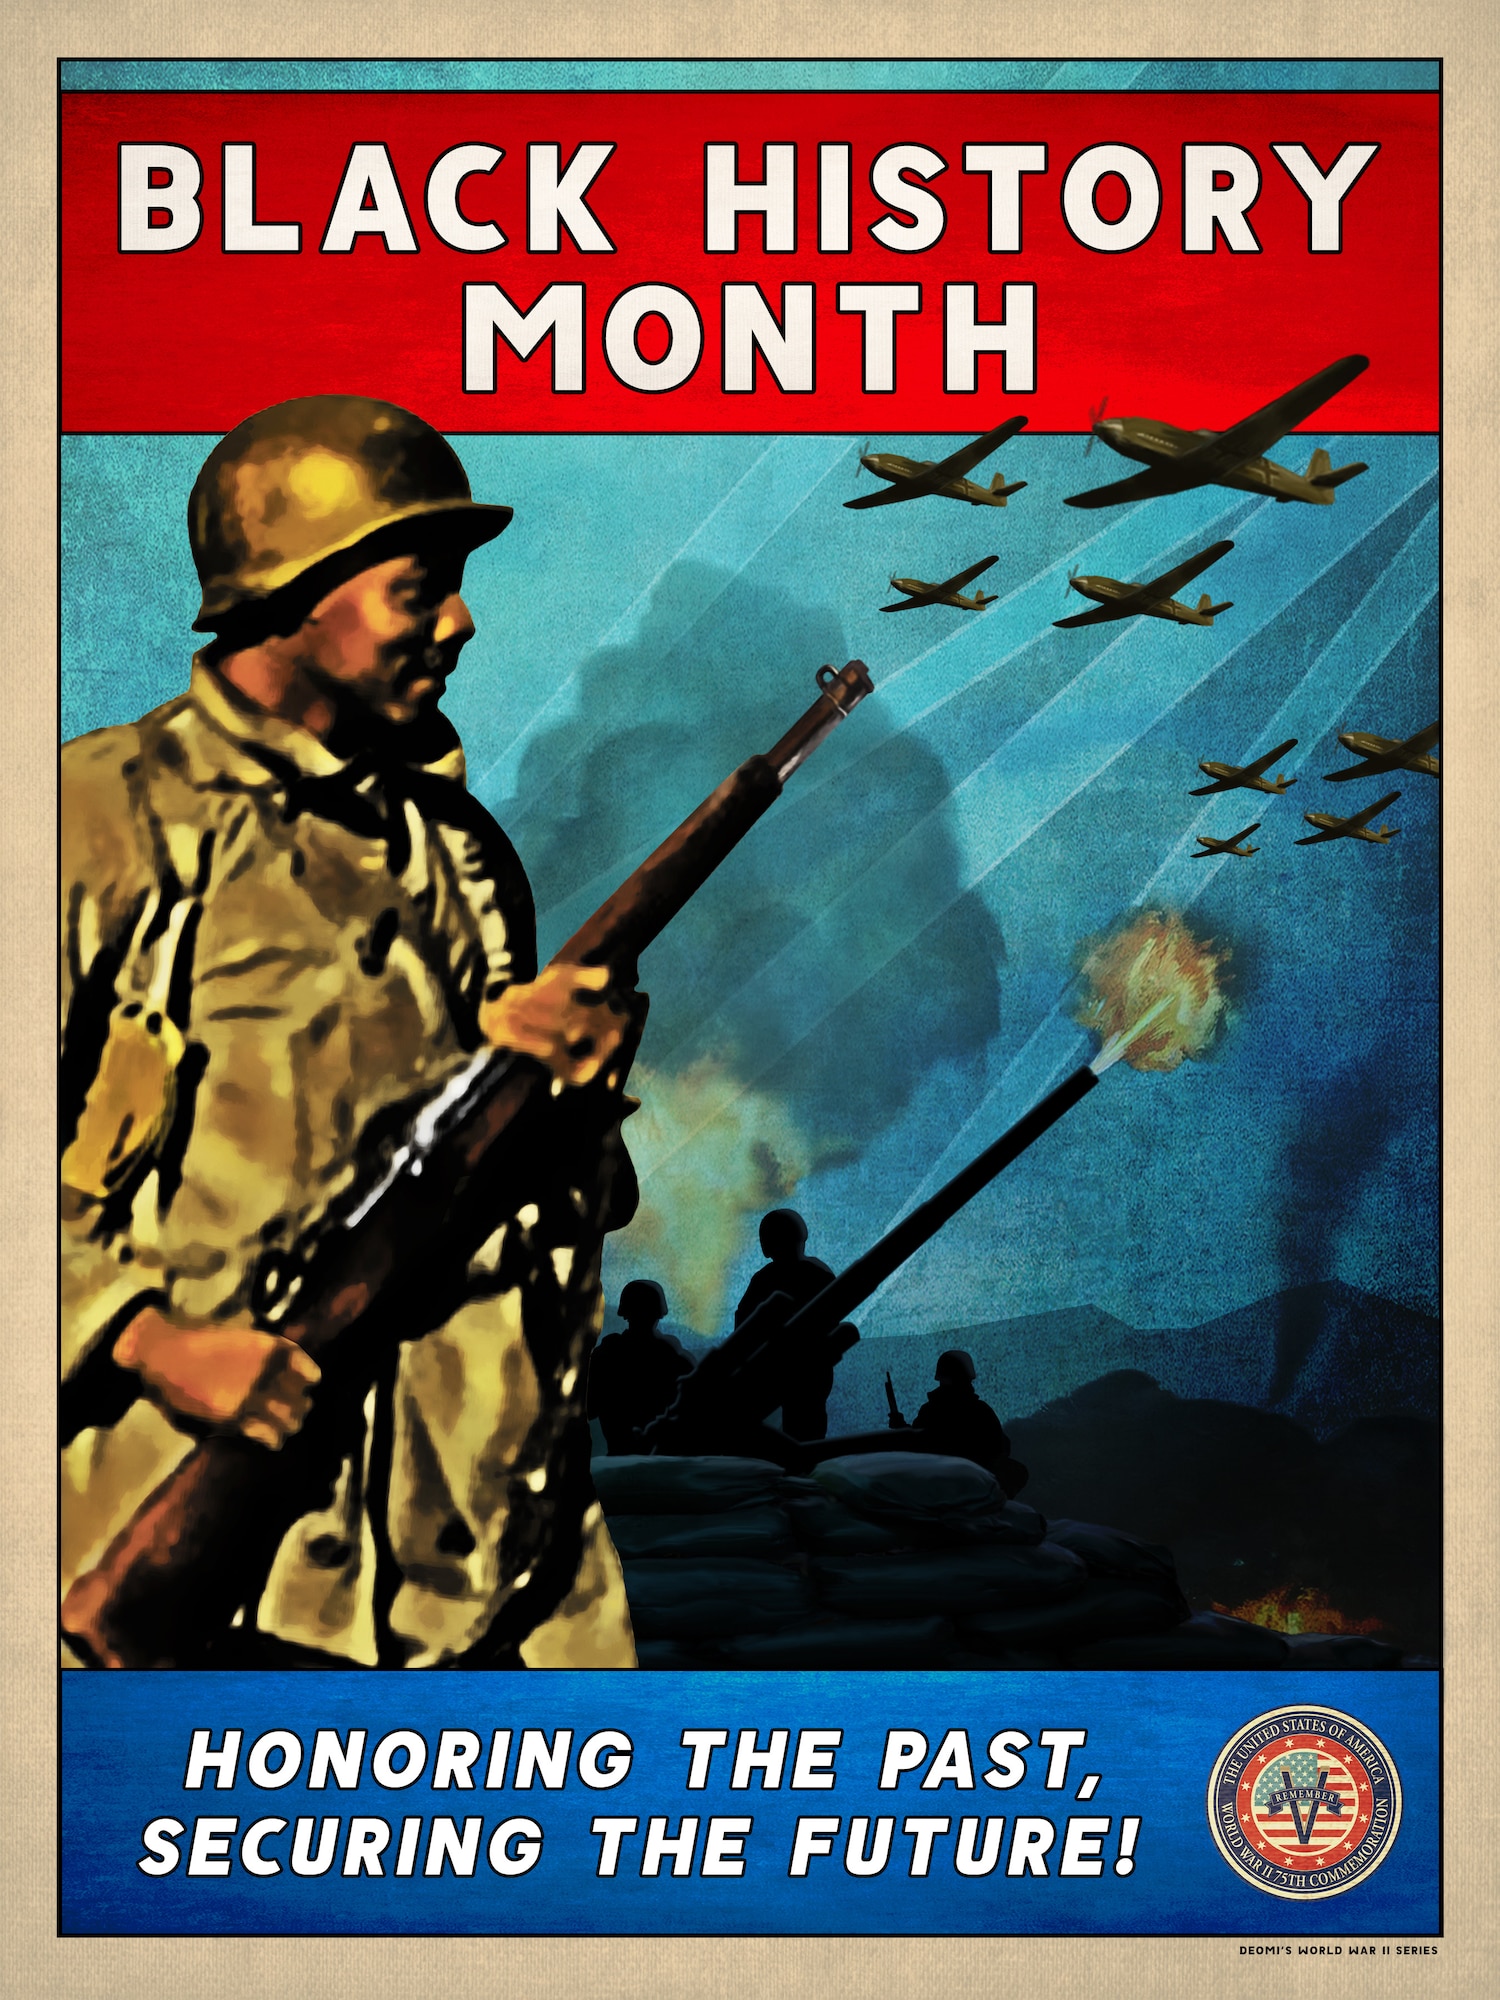 A graphic depicting World War II soldiers and aircraft, and Black History Month Theme, "Honoring the Past, Securing the Future!"